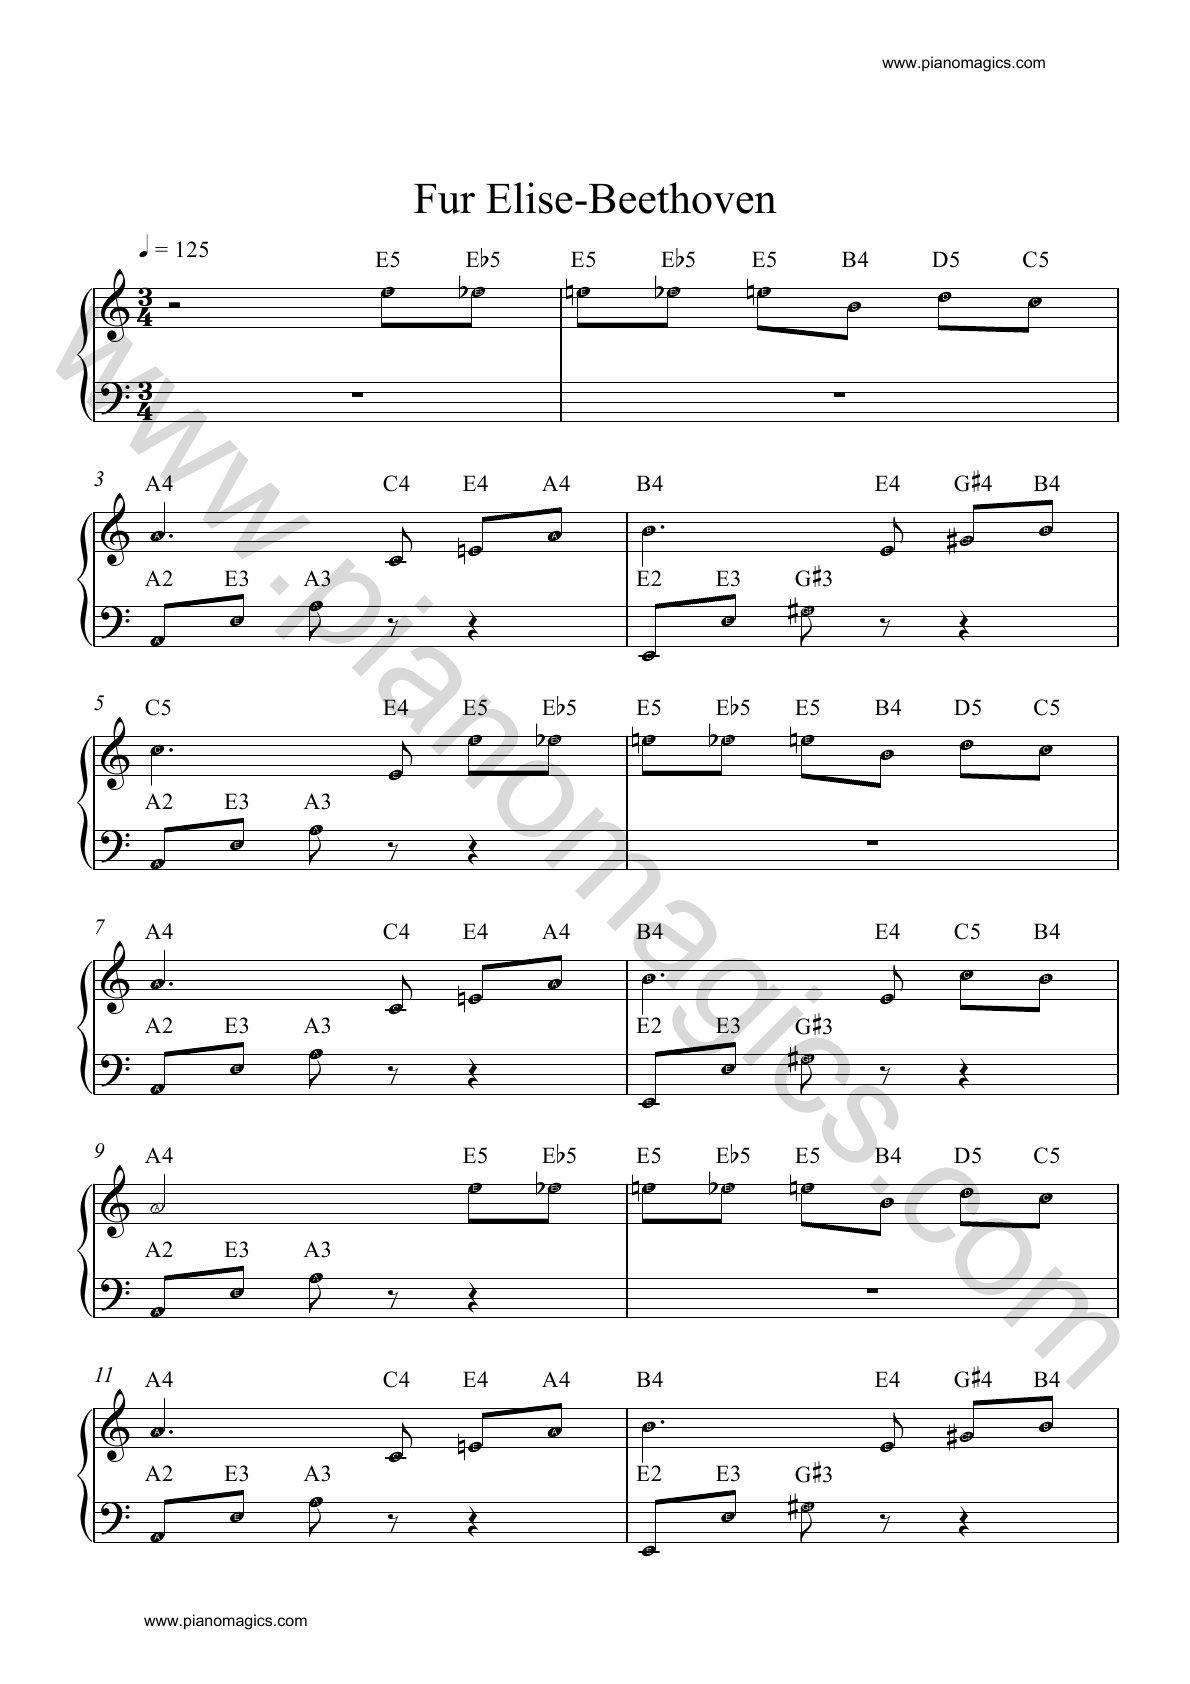 Get Your Beethoven Fur Elise Sheet Music For Piano Along ...